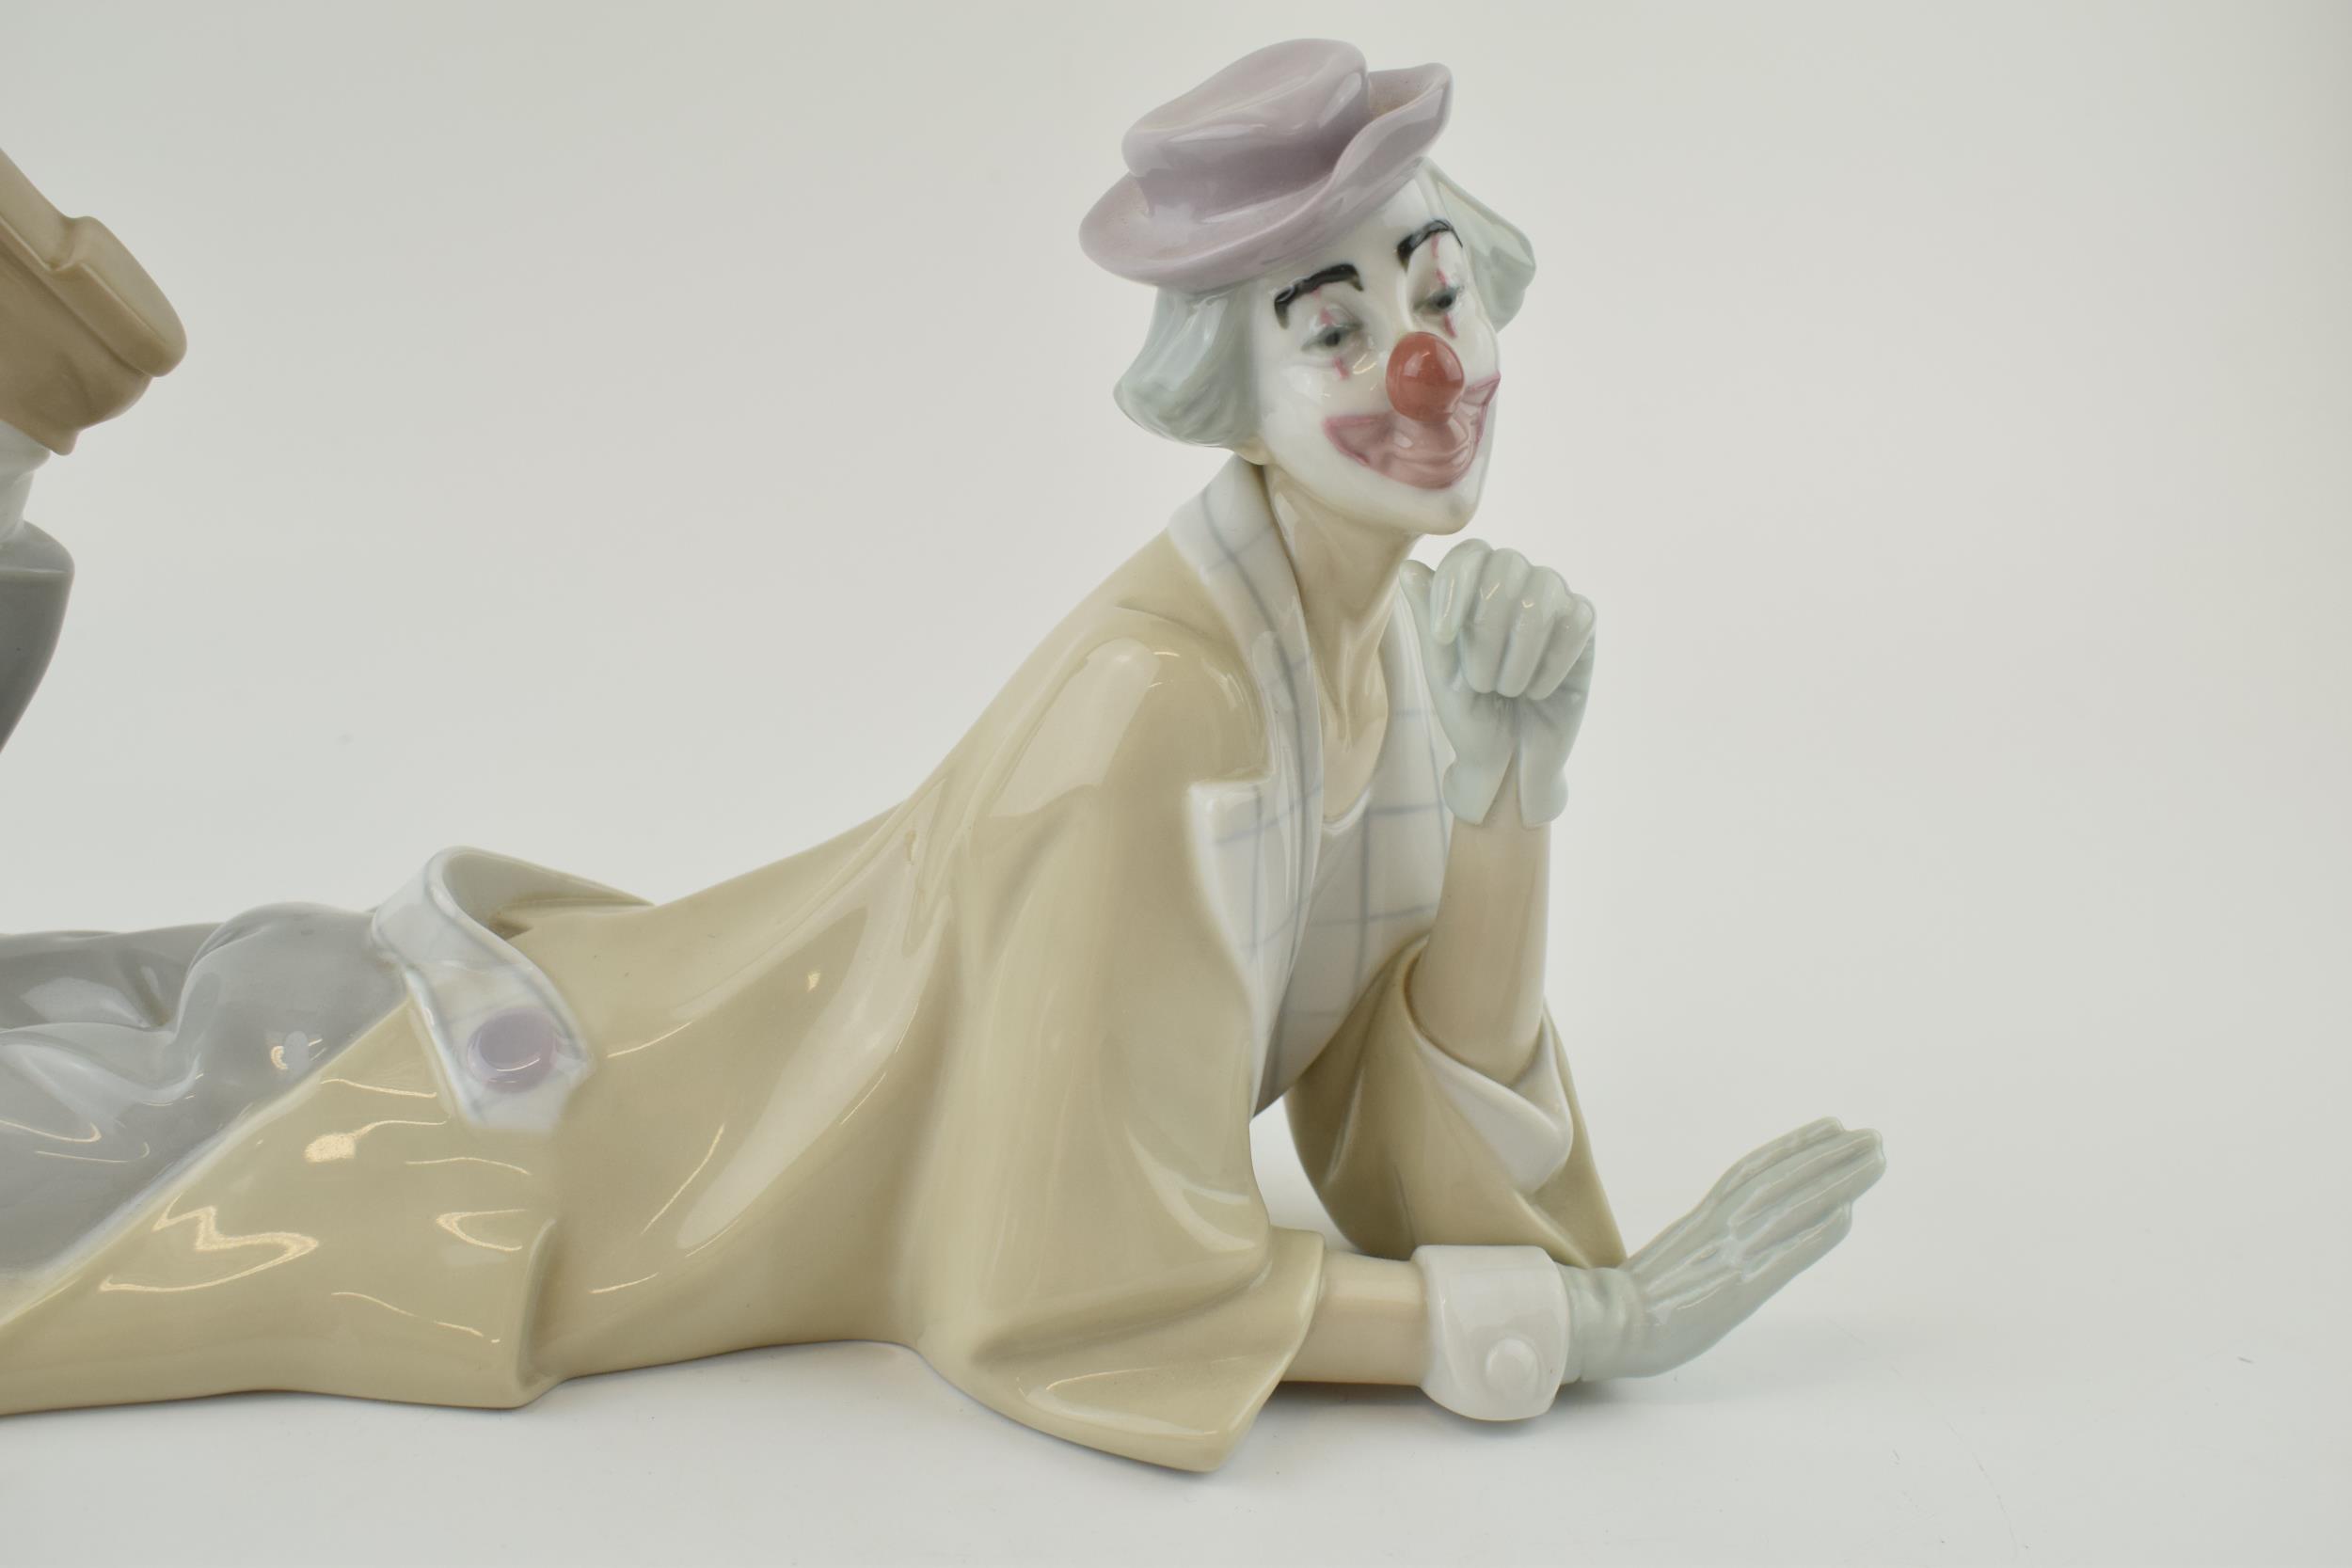 Large Lladro clown figurine model no 4618, 15.5cm tall and 37cm. In good condition with no obvious - Bild 2 aus 3